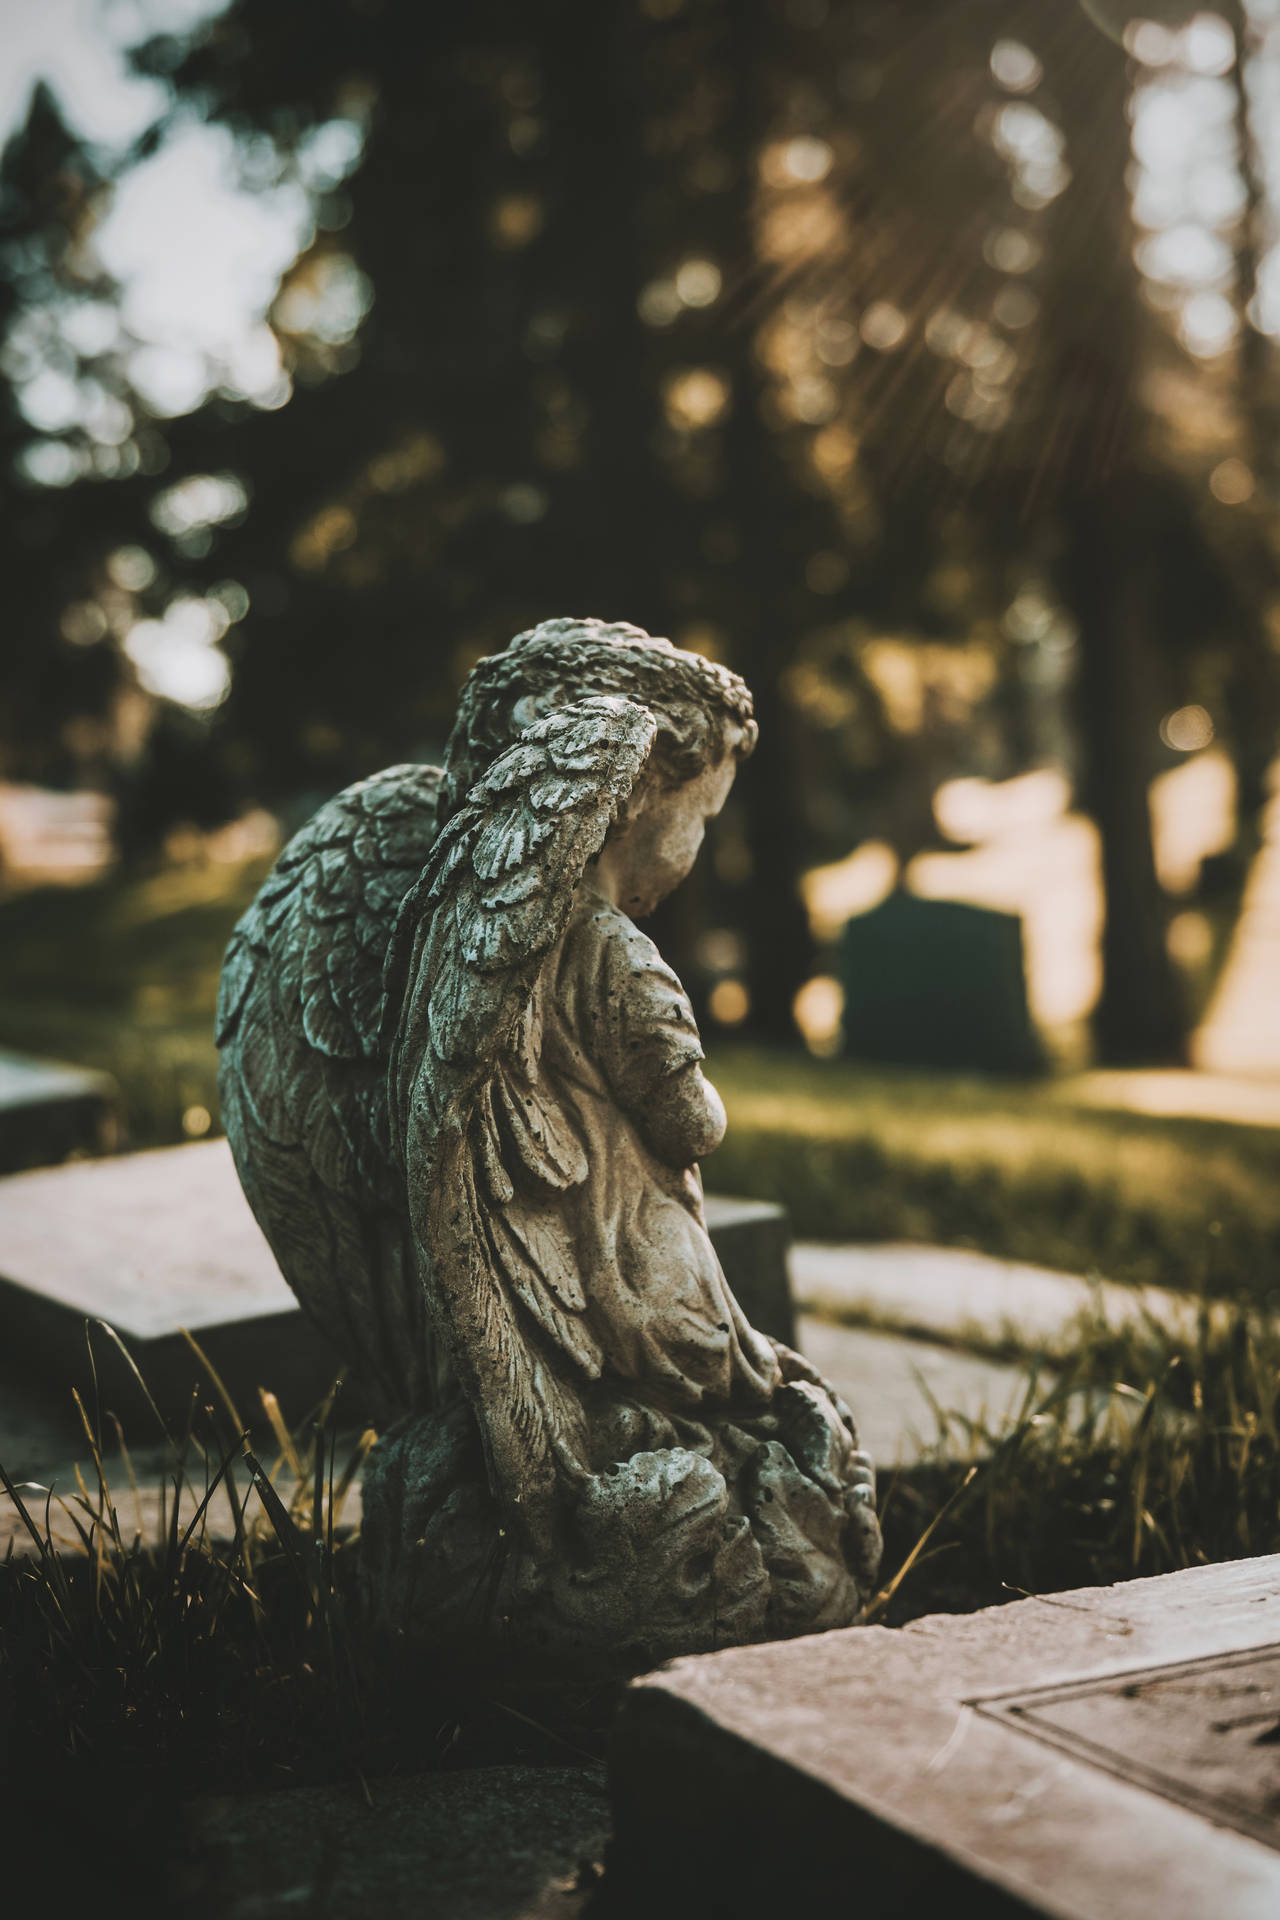 Angel Statue In Cemetery